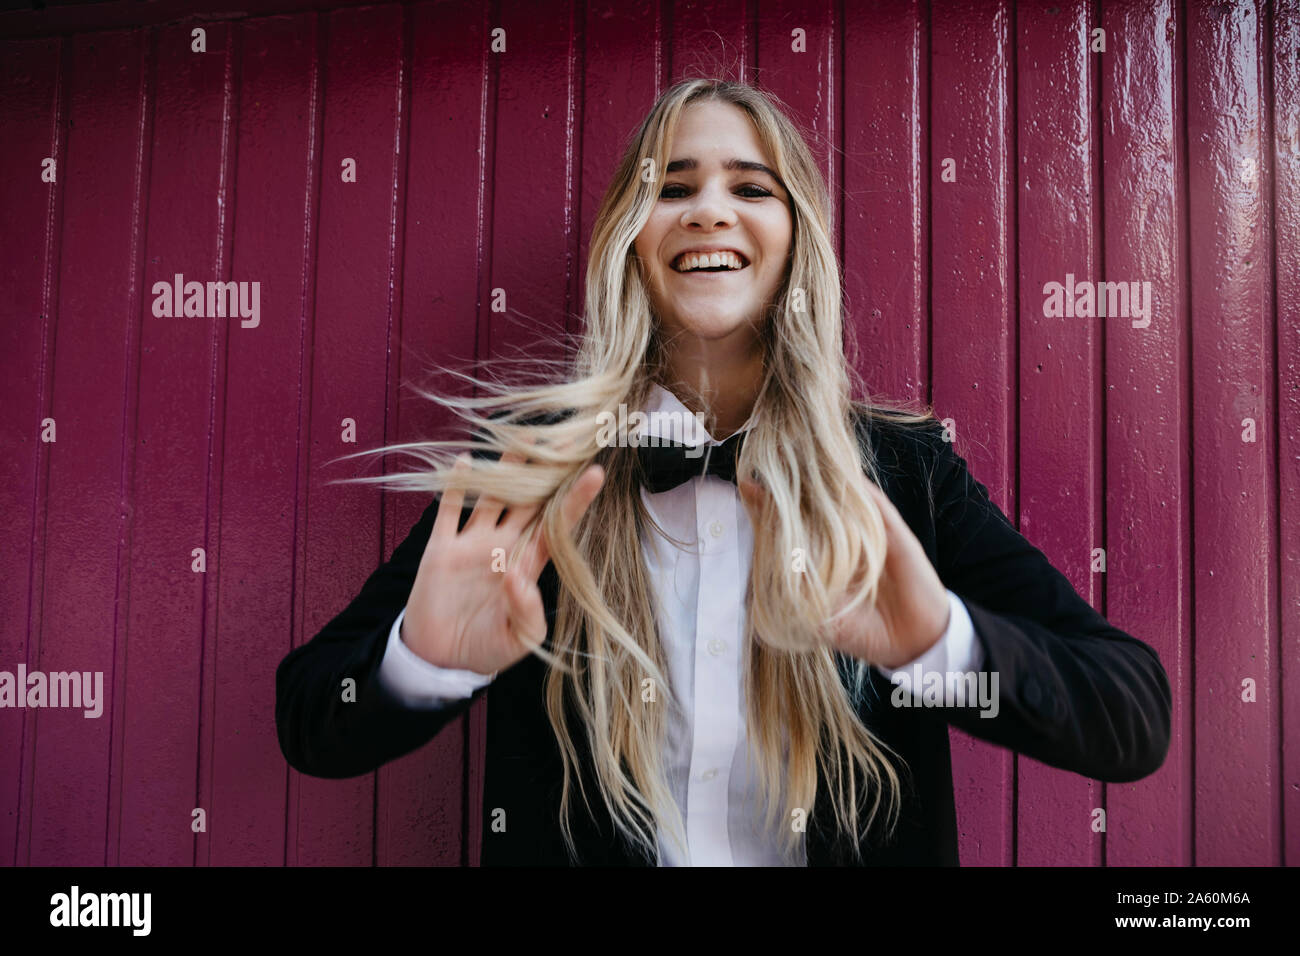 Portrait of laughing blond woman wearing black tie and blazer Stock Photo